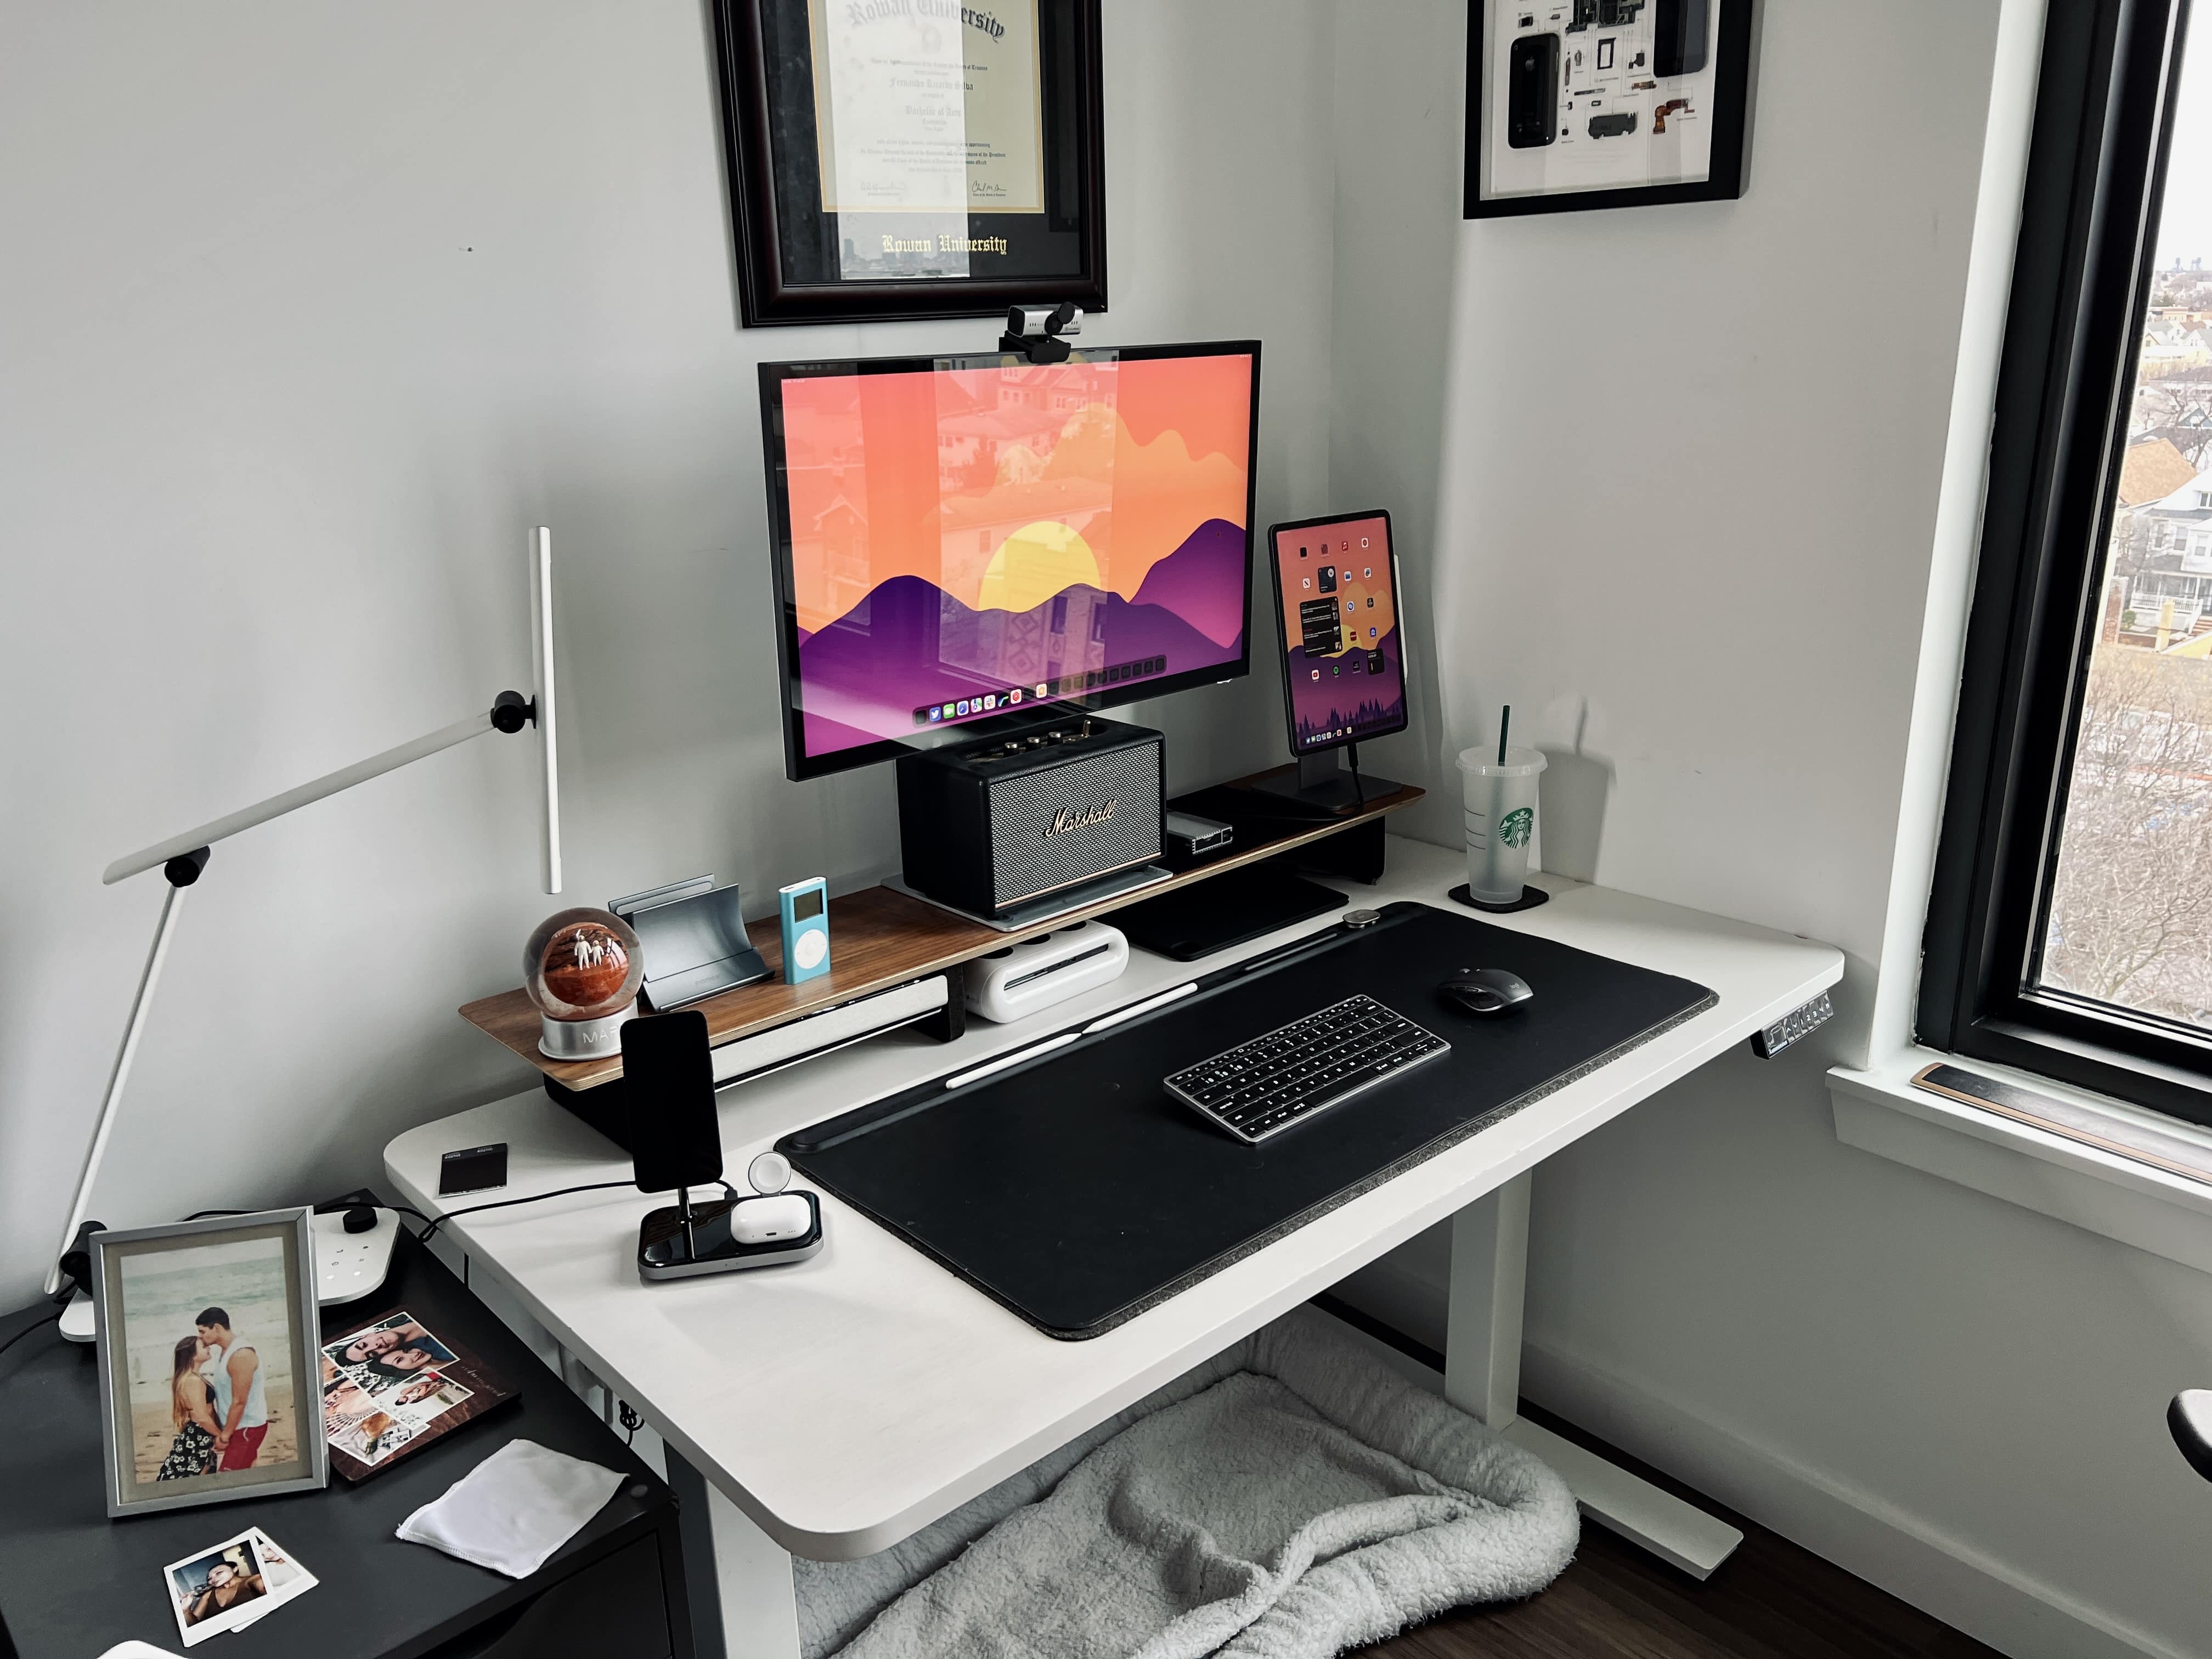 How I built my desk setup entirely around using iPad as a computer photo